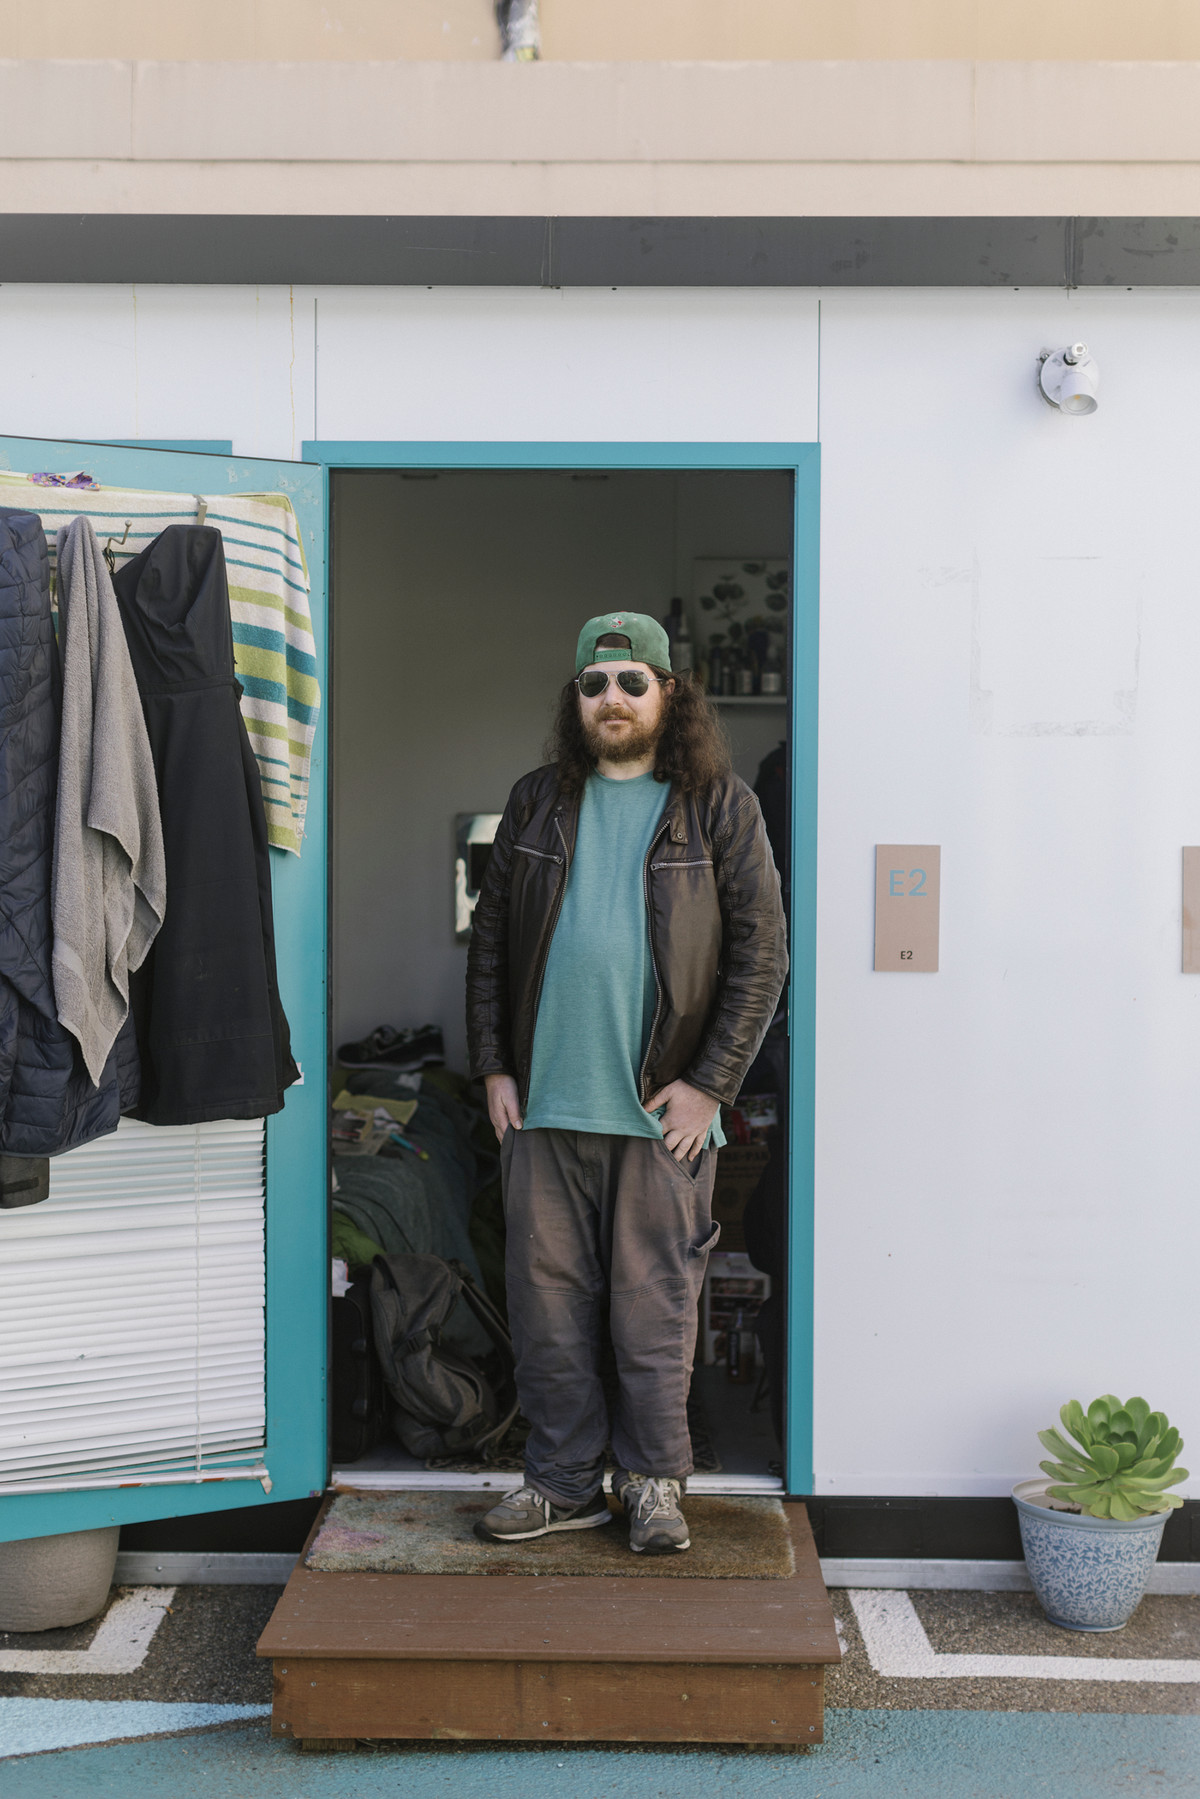 A man with long dark hair, a cap, and glasses, stands in the doorway of a tiny house.